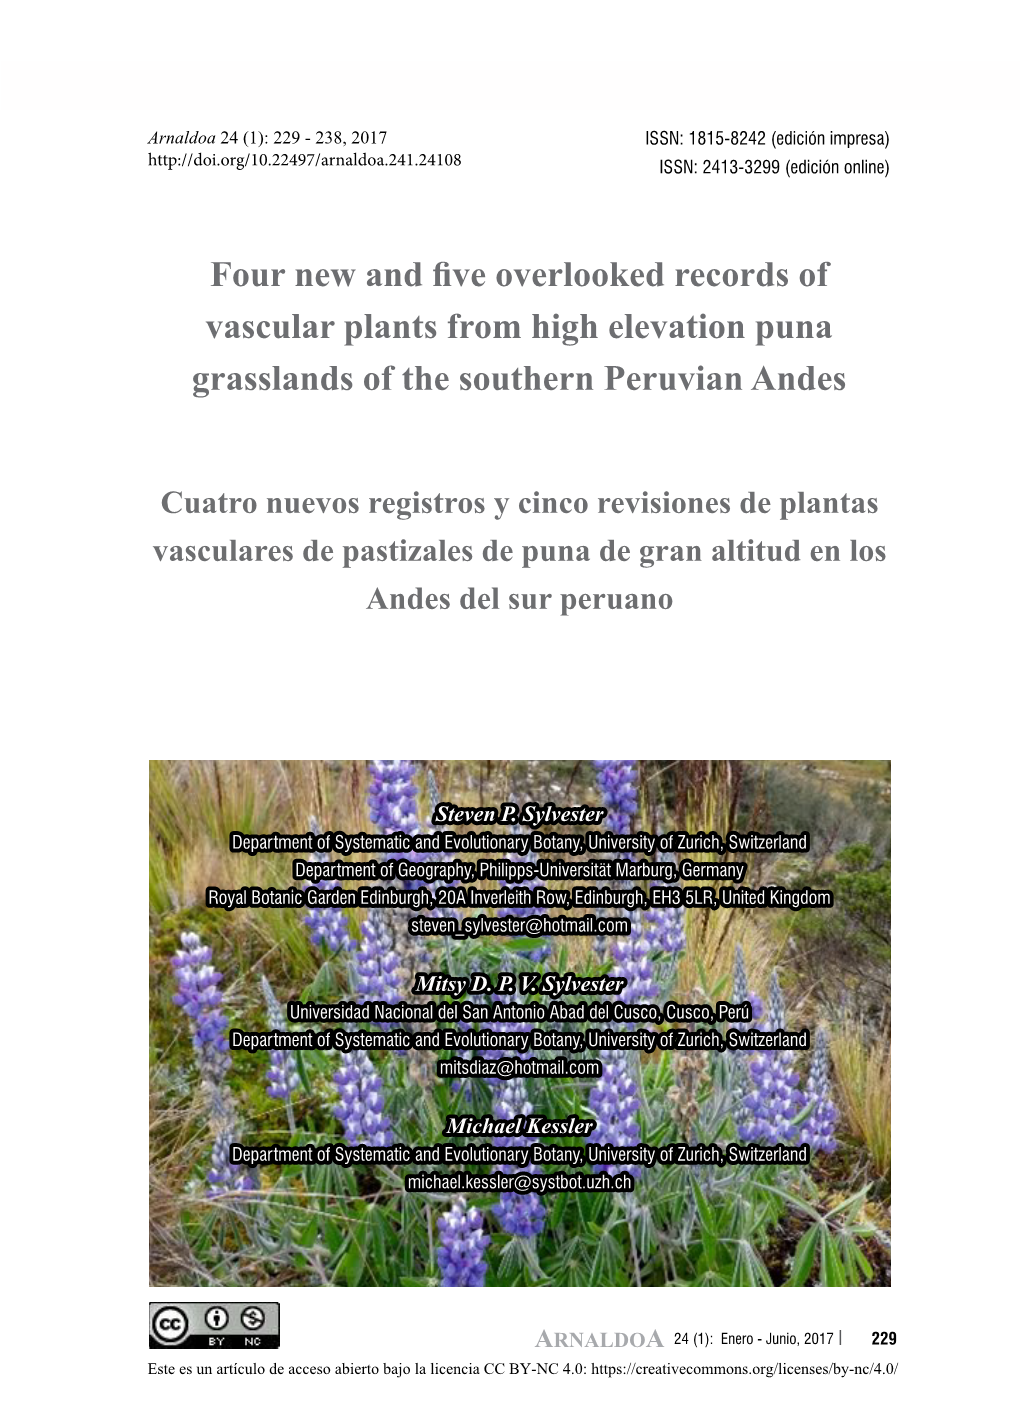 Four New and Five Overlooked Records of Vascular Plants from High Elevation Puna Grasslands of the Southern Peruvian Andes